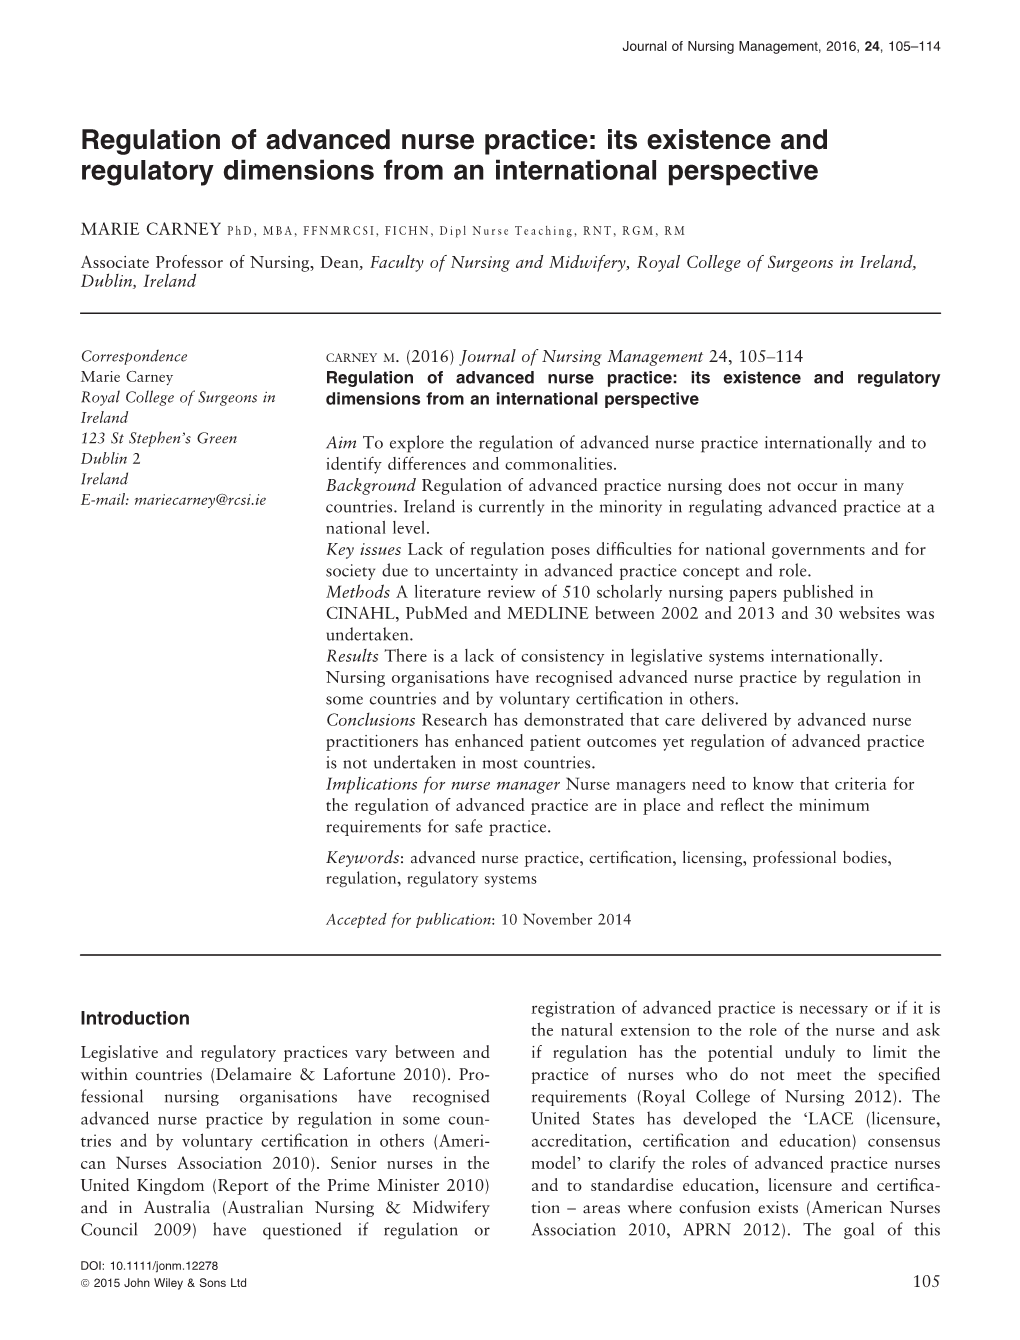 Regulation of Advanced Nurse Practice: Its Existence and Regulatory Dimensions from an International Perspective